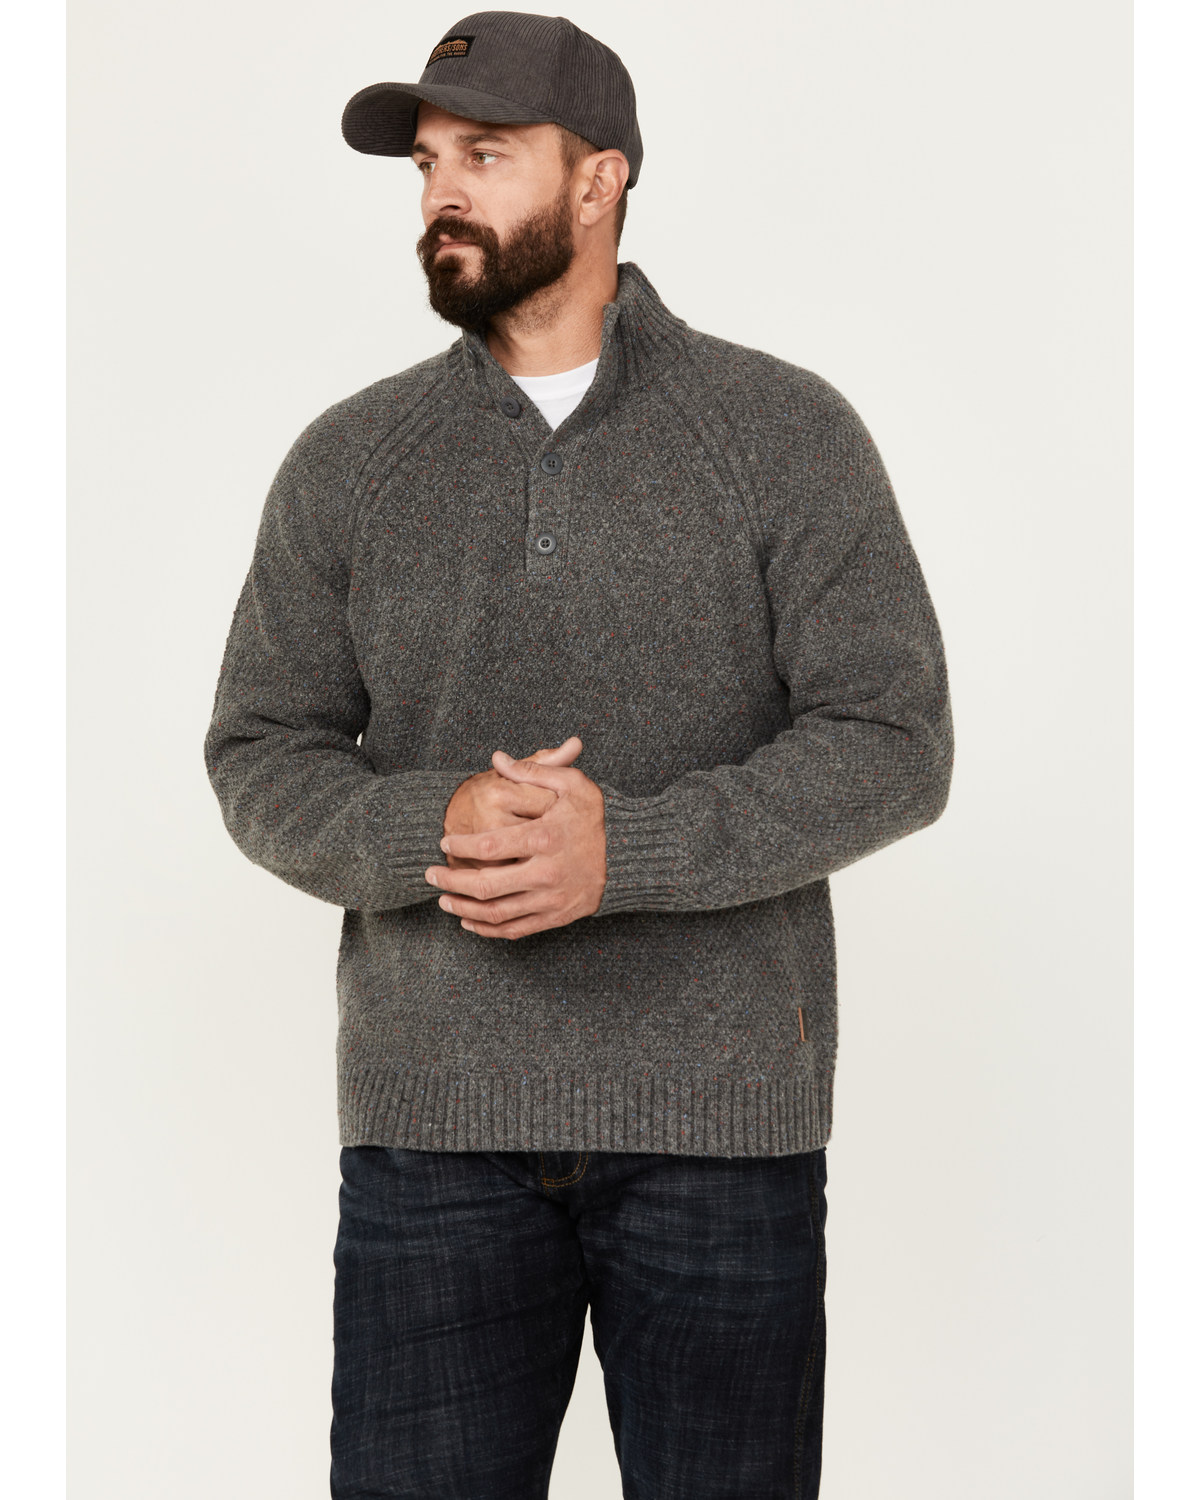 Brothers and Sons Men's Merino Donegal Button Pullover